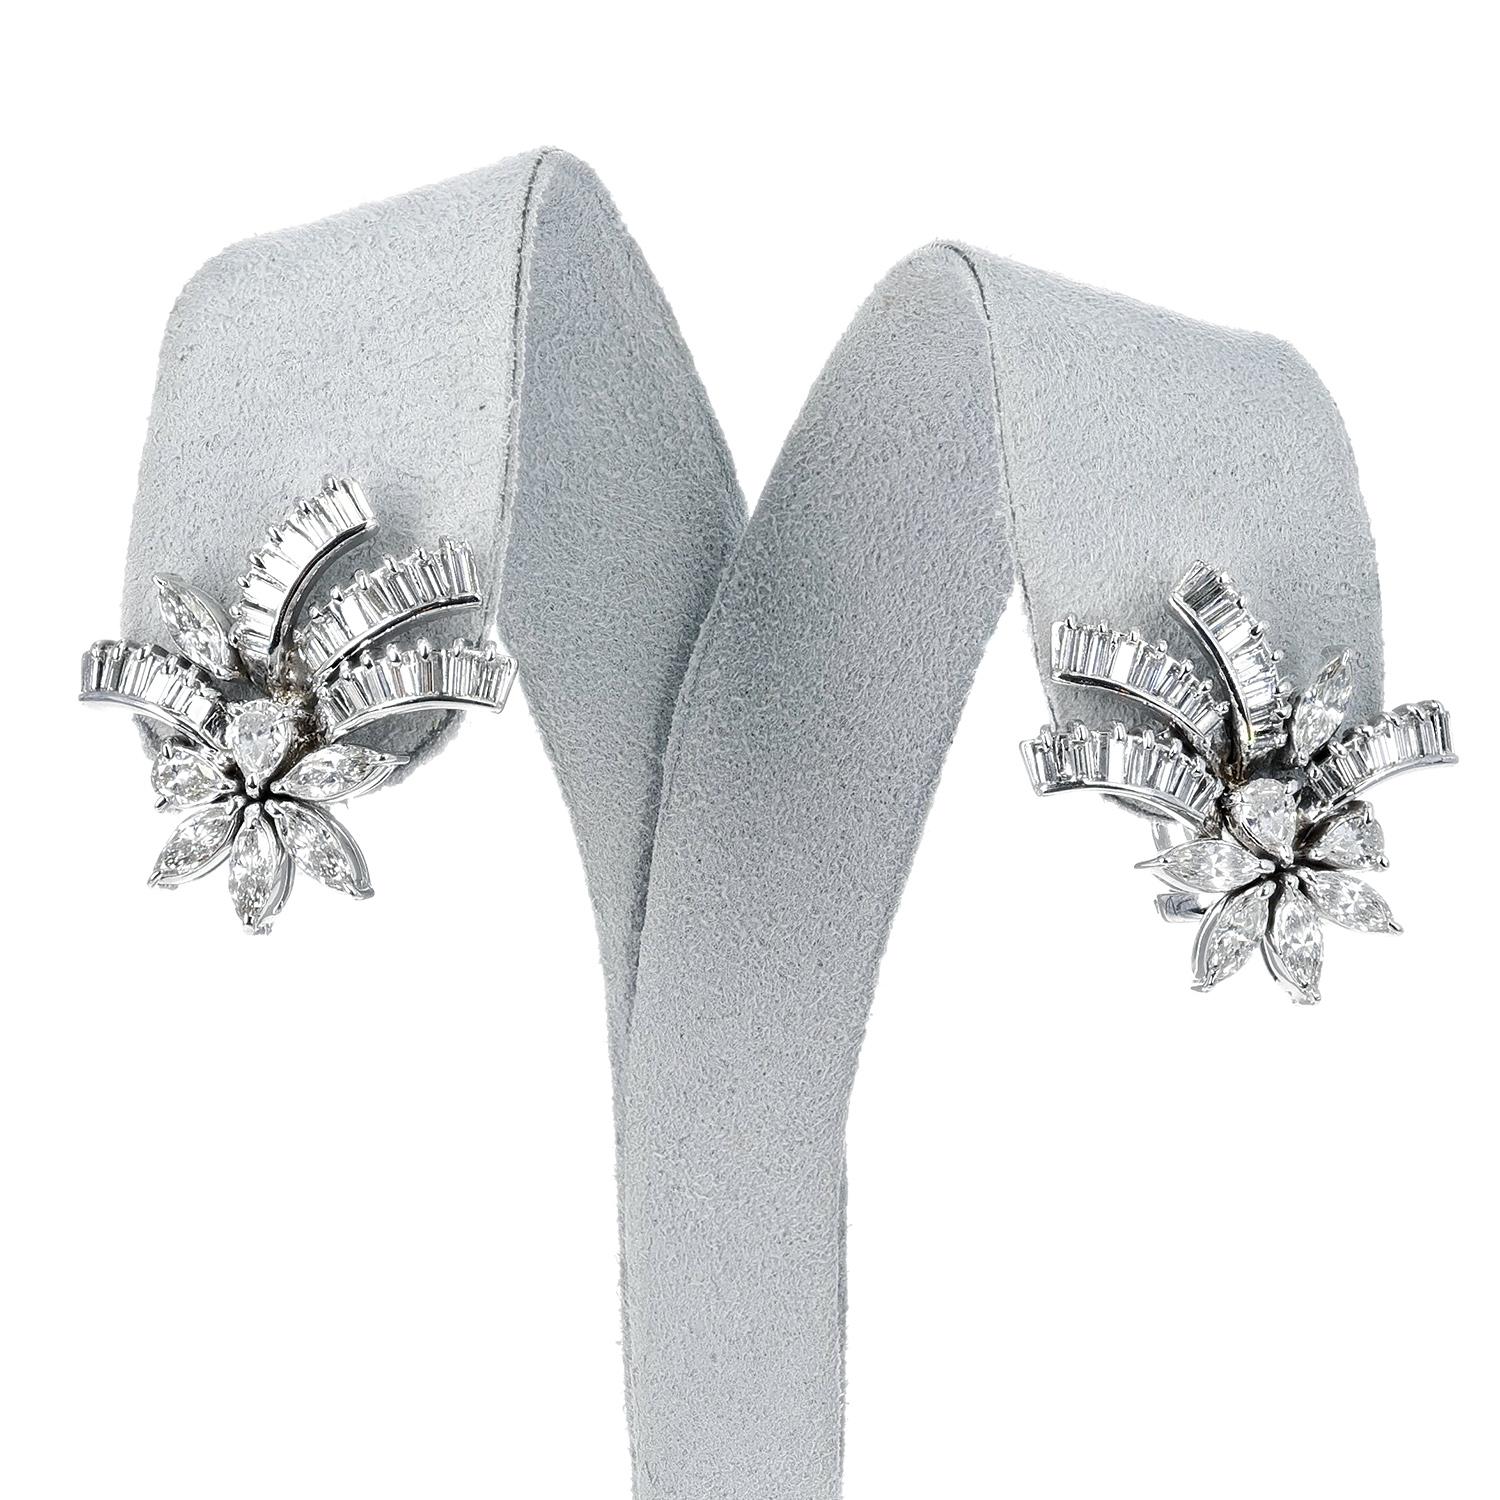 A pair of Diamond Floral Cocktail Earrings with appx. 3 carats of diamonds in Pear, Marquise, and Baguette shapes made in Platinum. 

